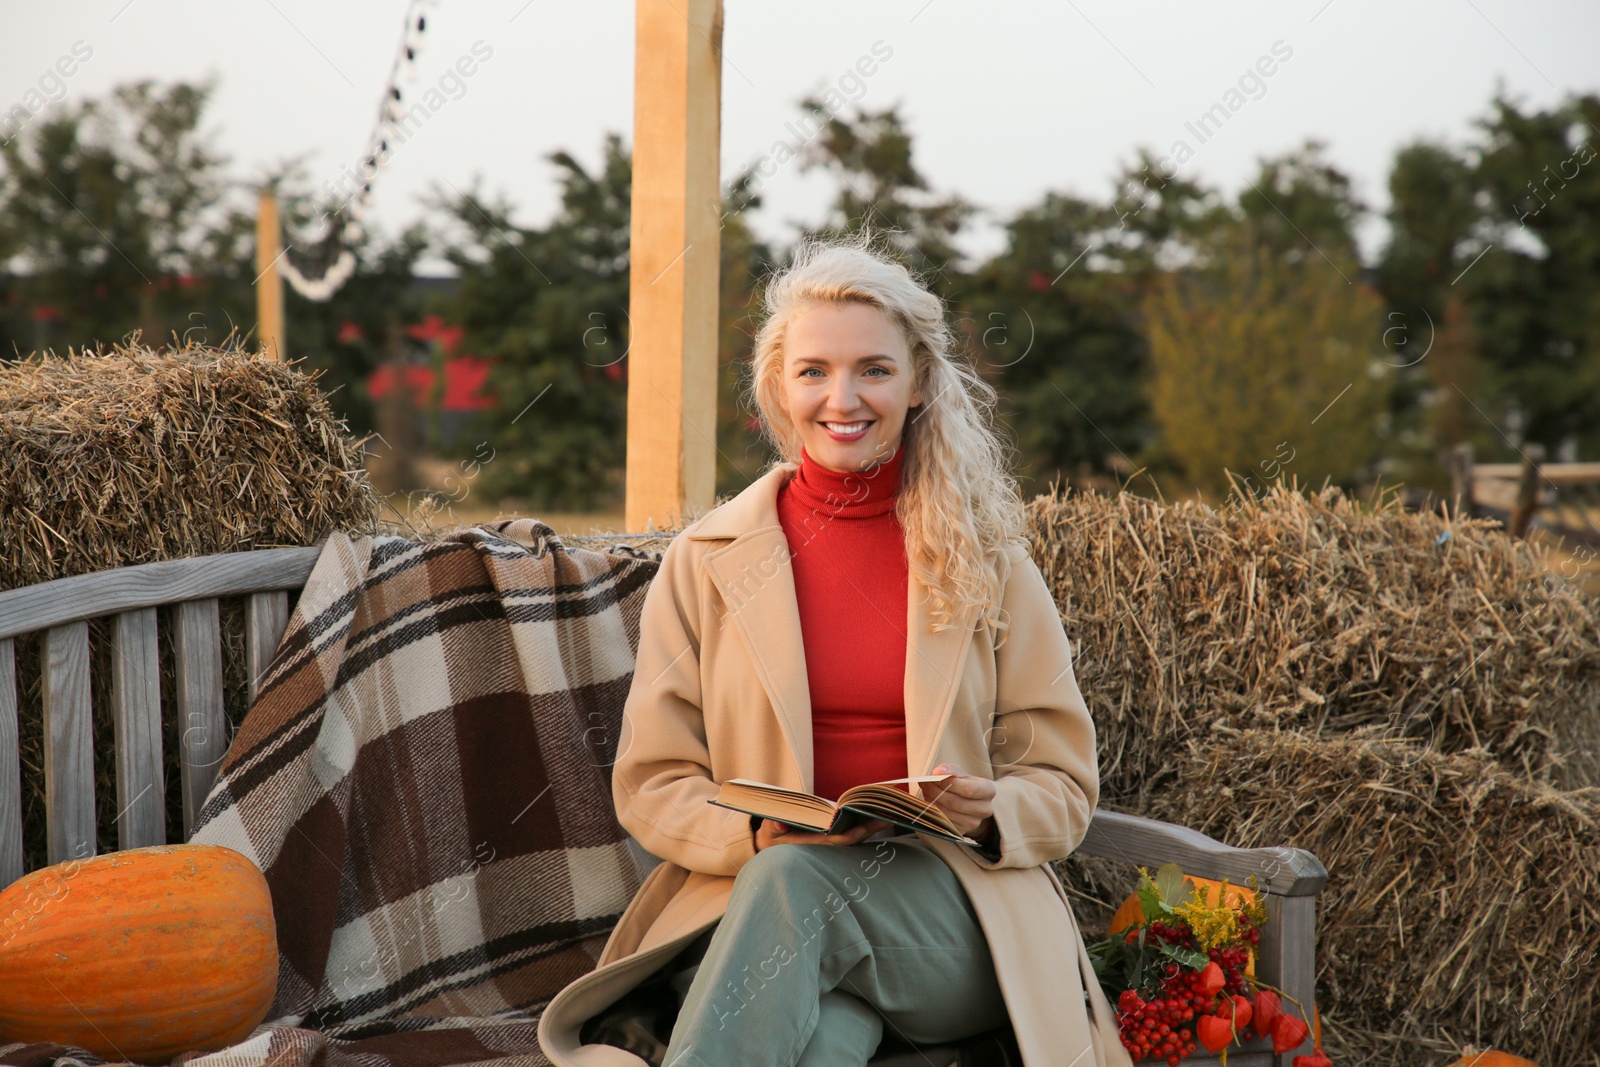 Photo of Beautiful woman with book sitting on wooden bench near pumpkins and hay bales outdoors. Autumn season